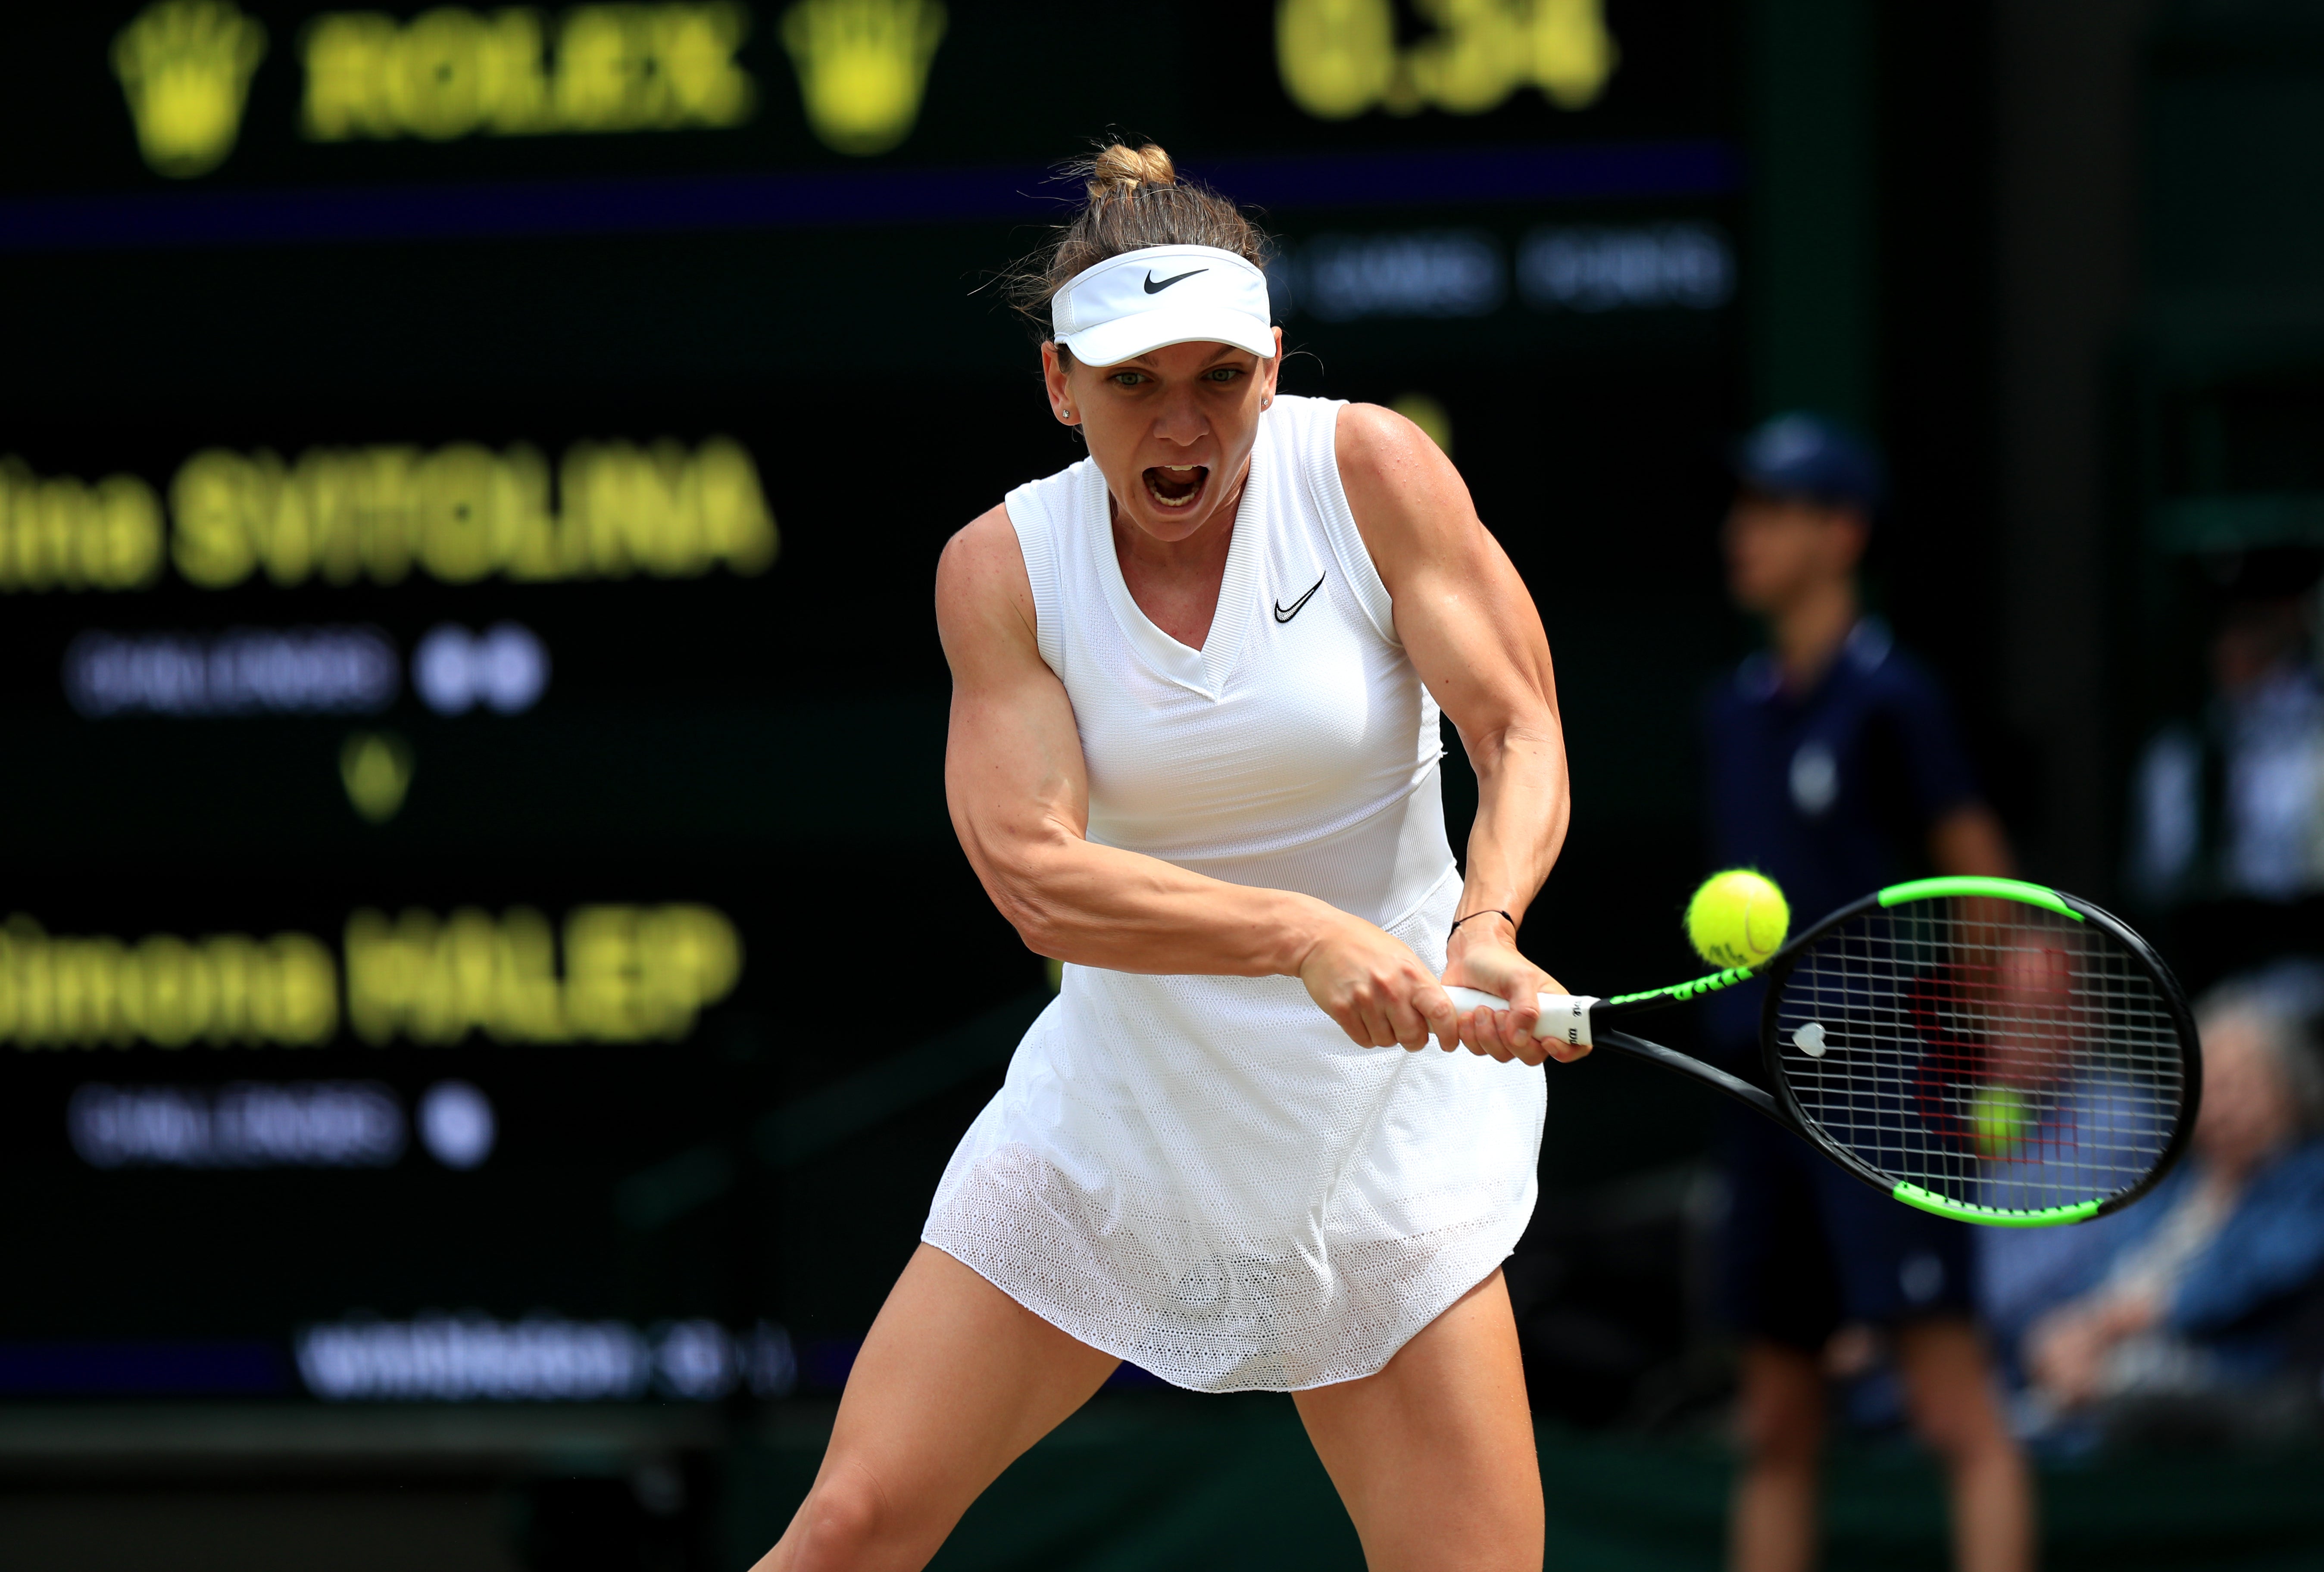 Wimbledon 2019 – Day Ten – The All England Lawn Tennis and Croquet Club